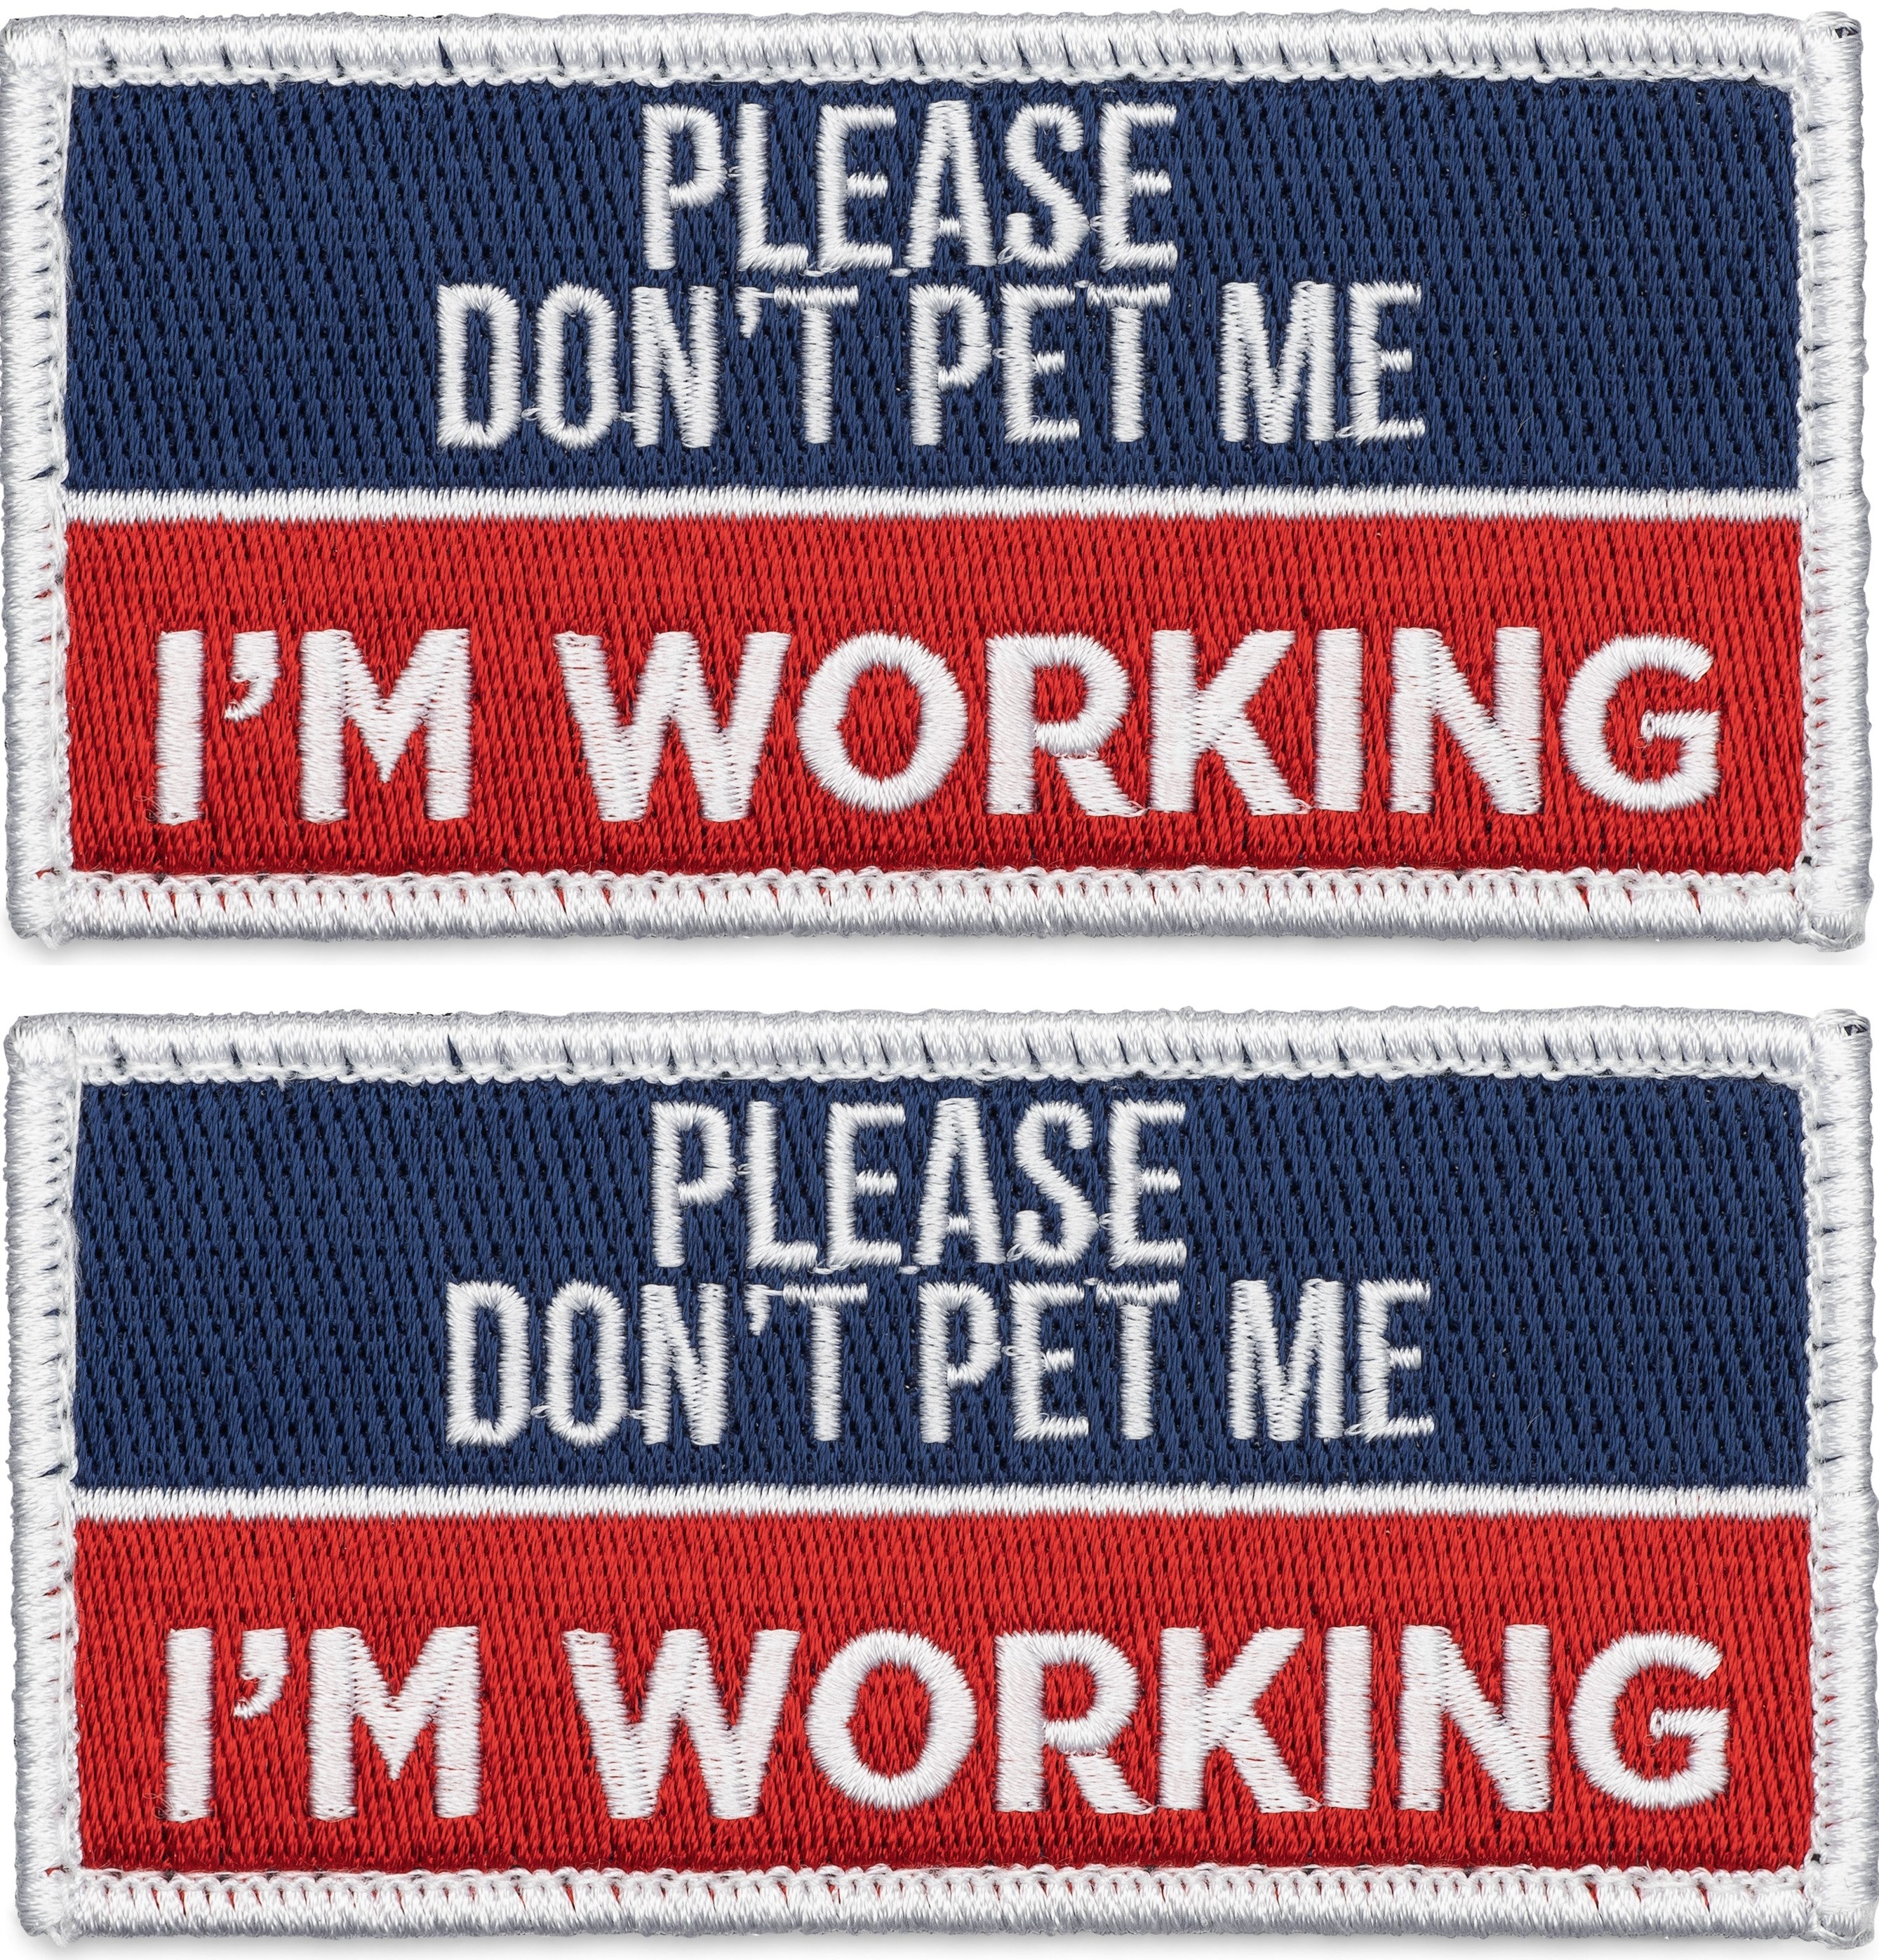 DO NOT PET - K9 Patches - Made In Canada